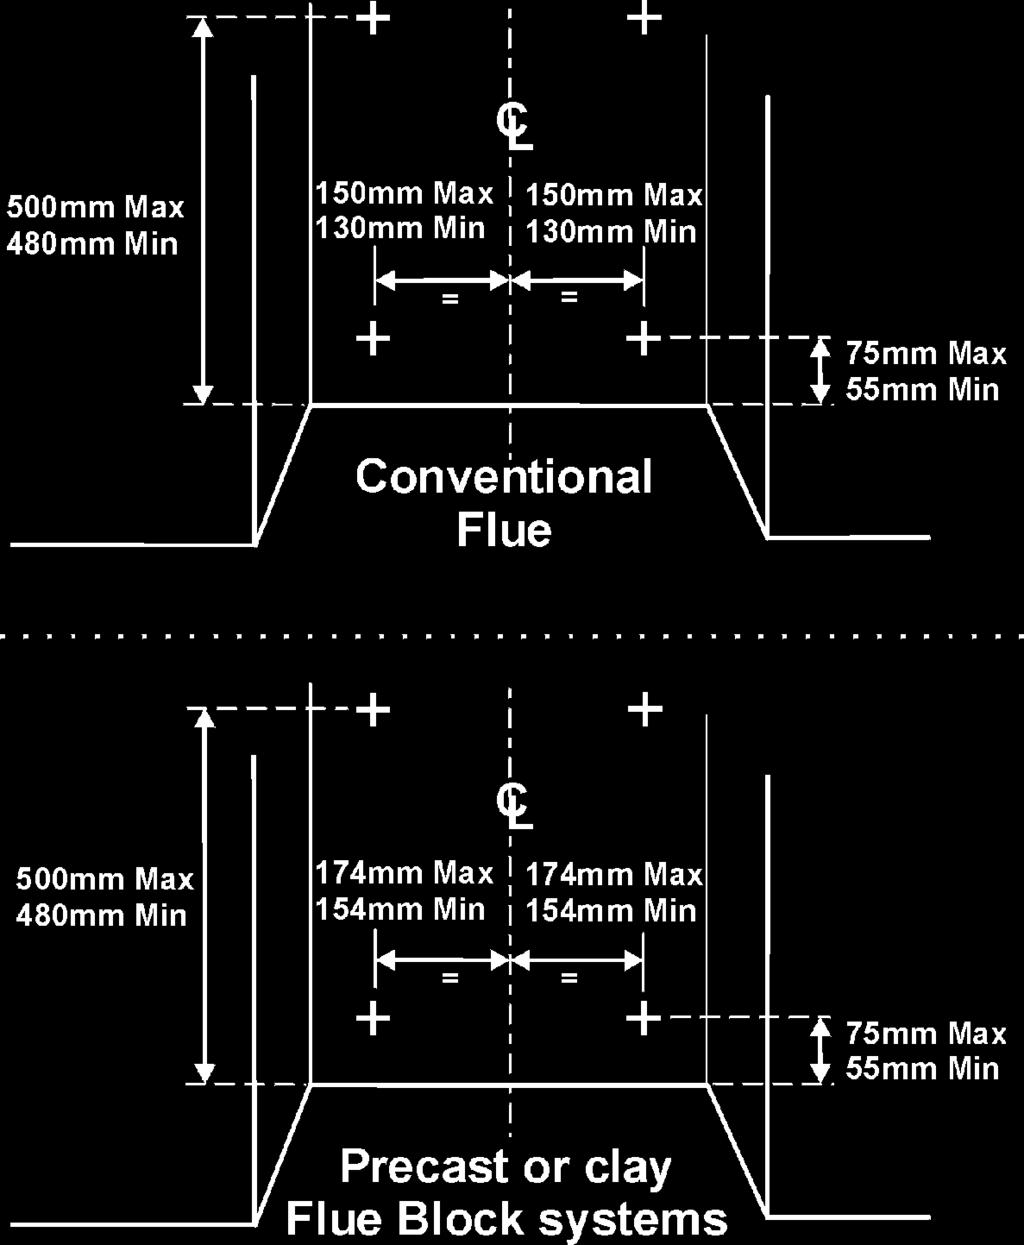 10.2 Method 2 - Cable retention and floor fixing. 1. Make sure that the relevant areas at the fireplace back or floor are sound enough to take the eyebolts and screws.